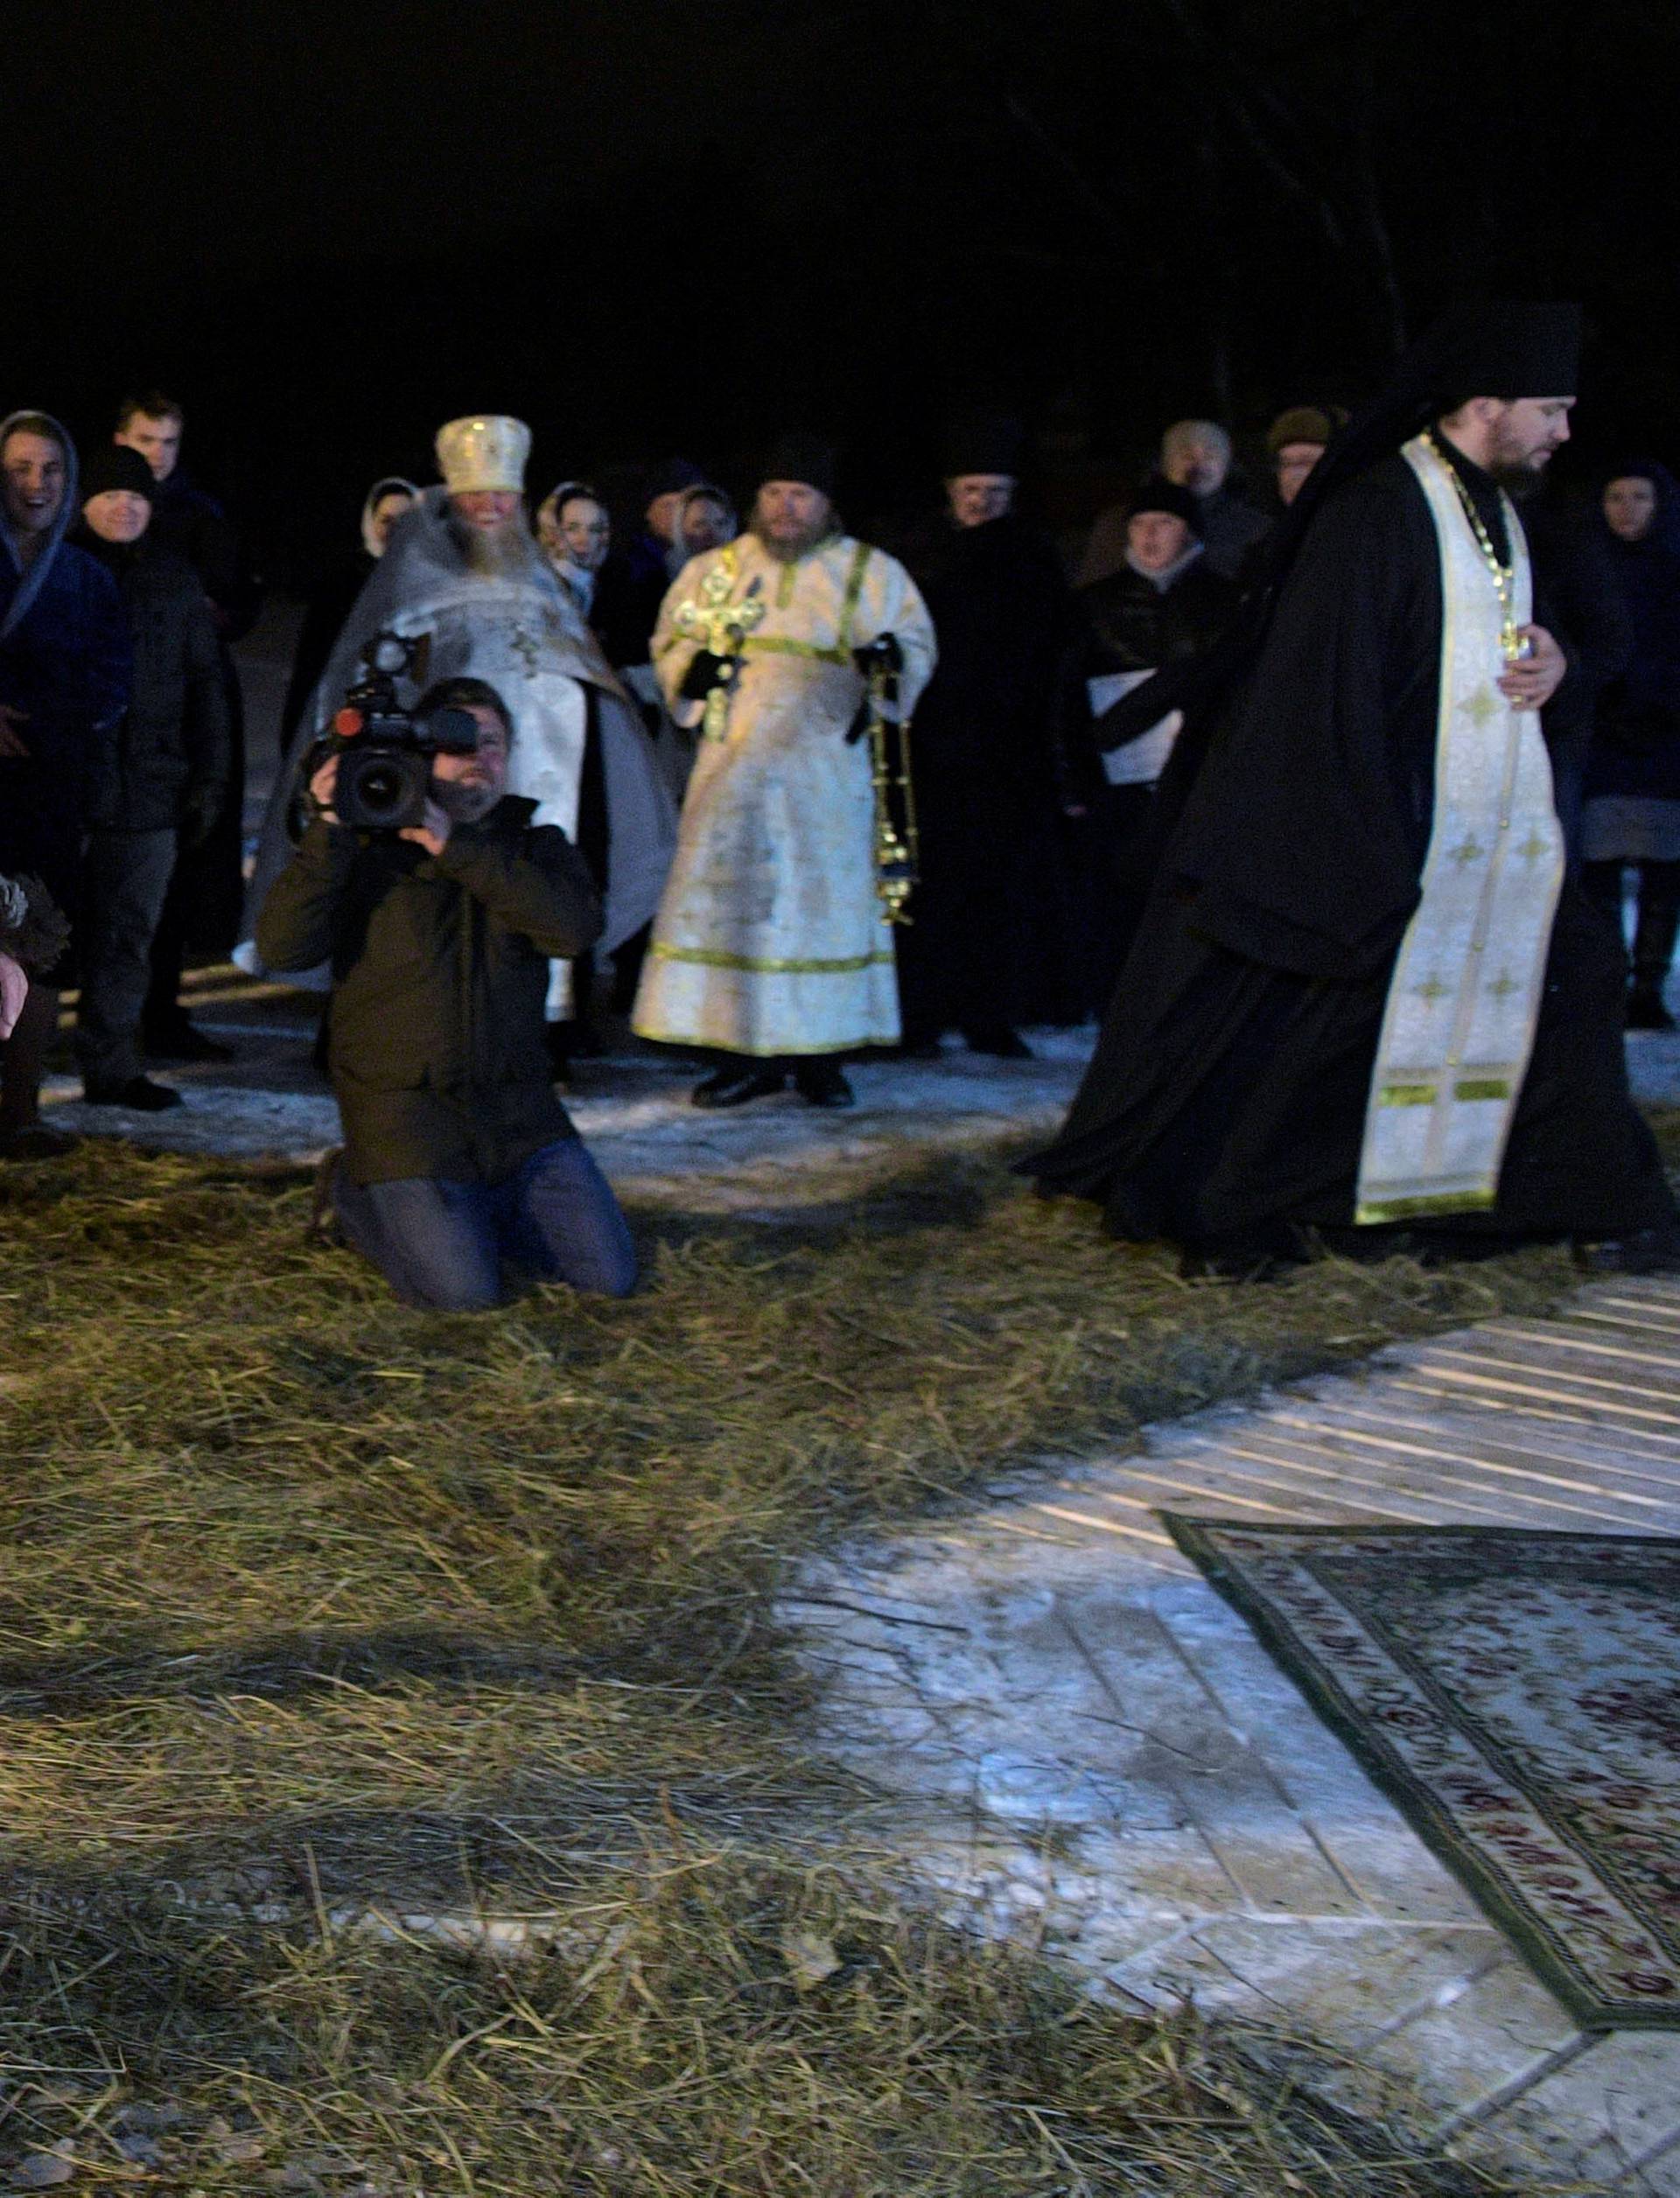 Russian President Vladimir Putin walks to take a dip in the water during Orthodox Epiphany celebrations at lake Seliger, Tver region